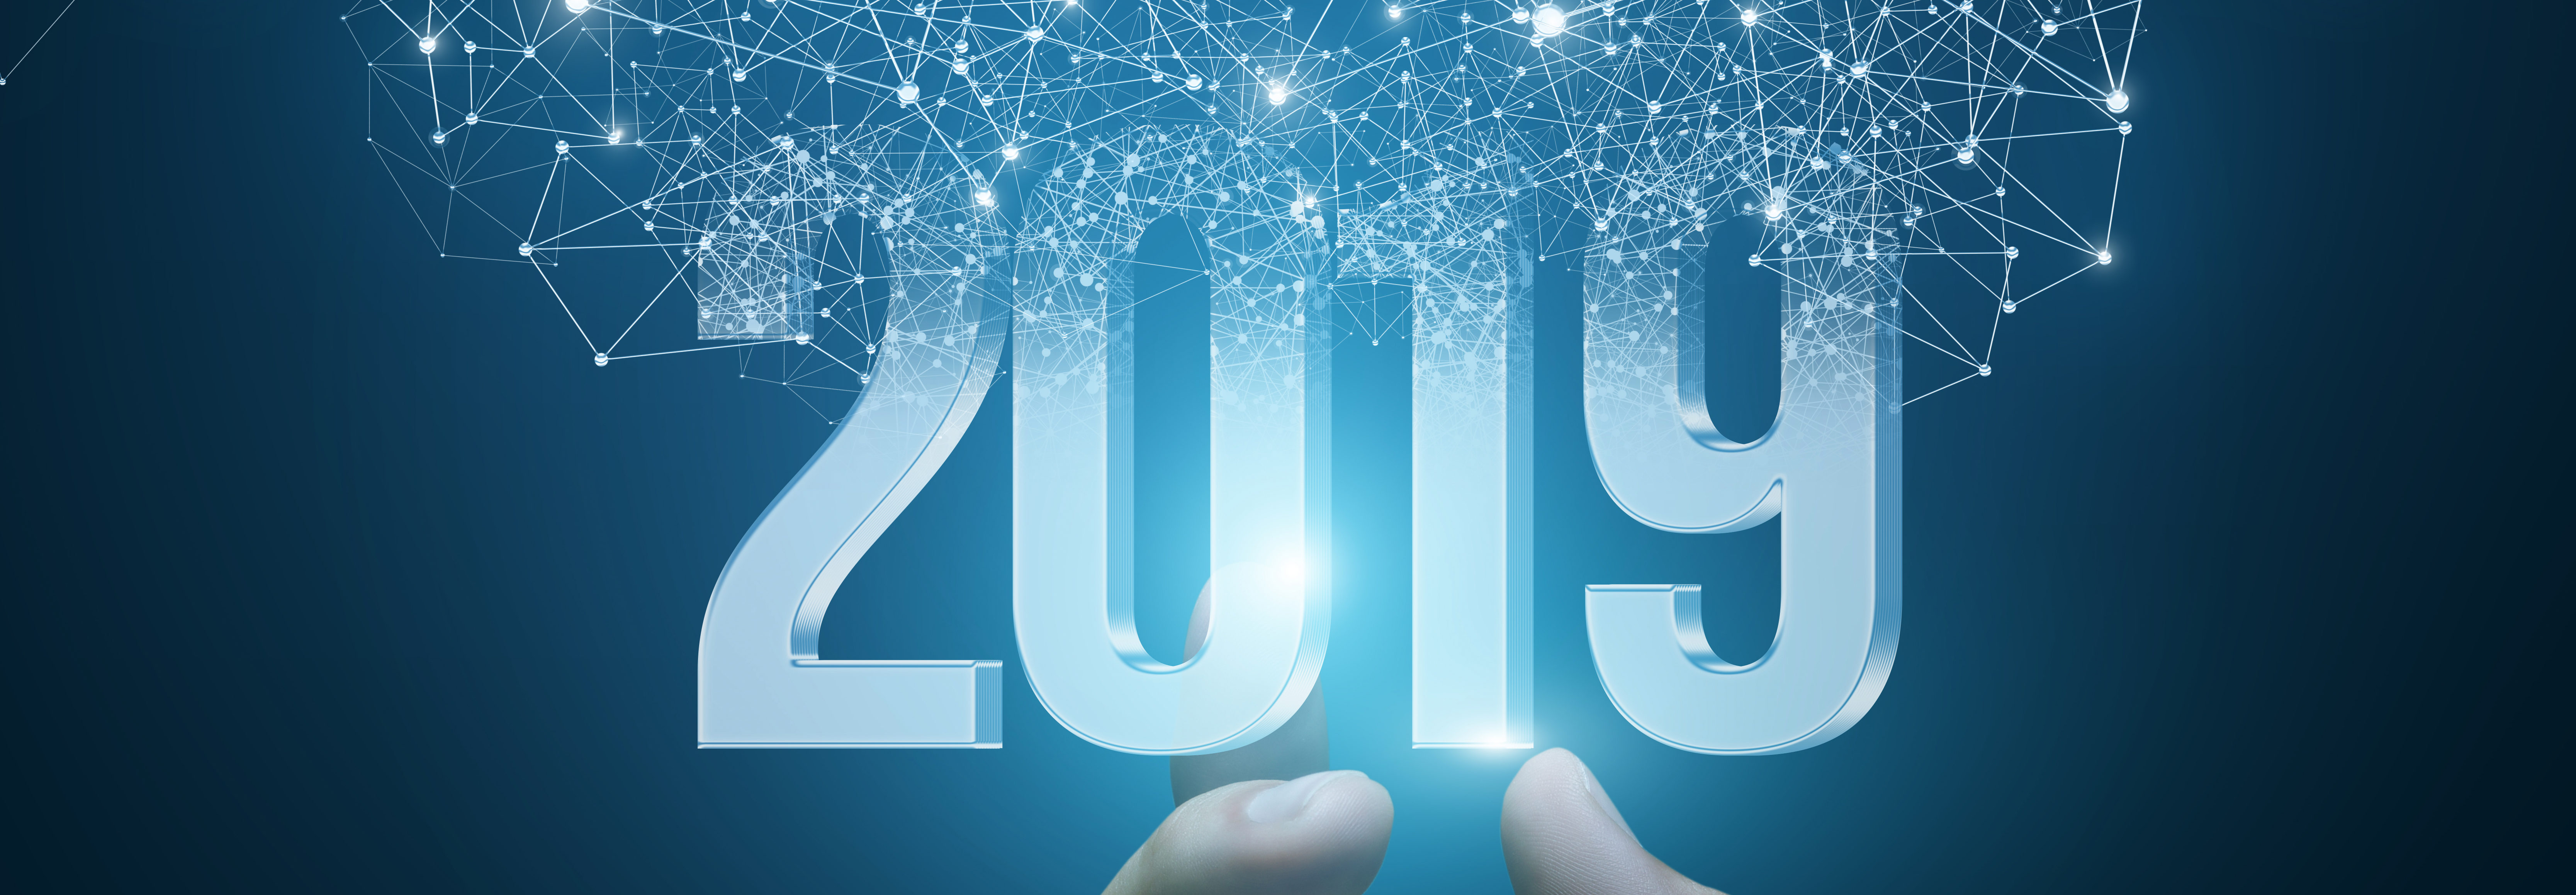 10 Cybersecurity Trends of 2018 and Key Recommendations for 2019